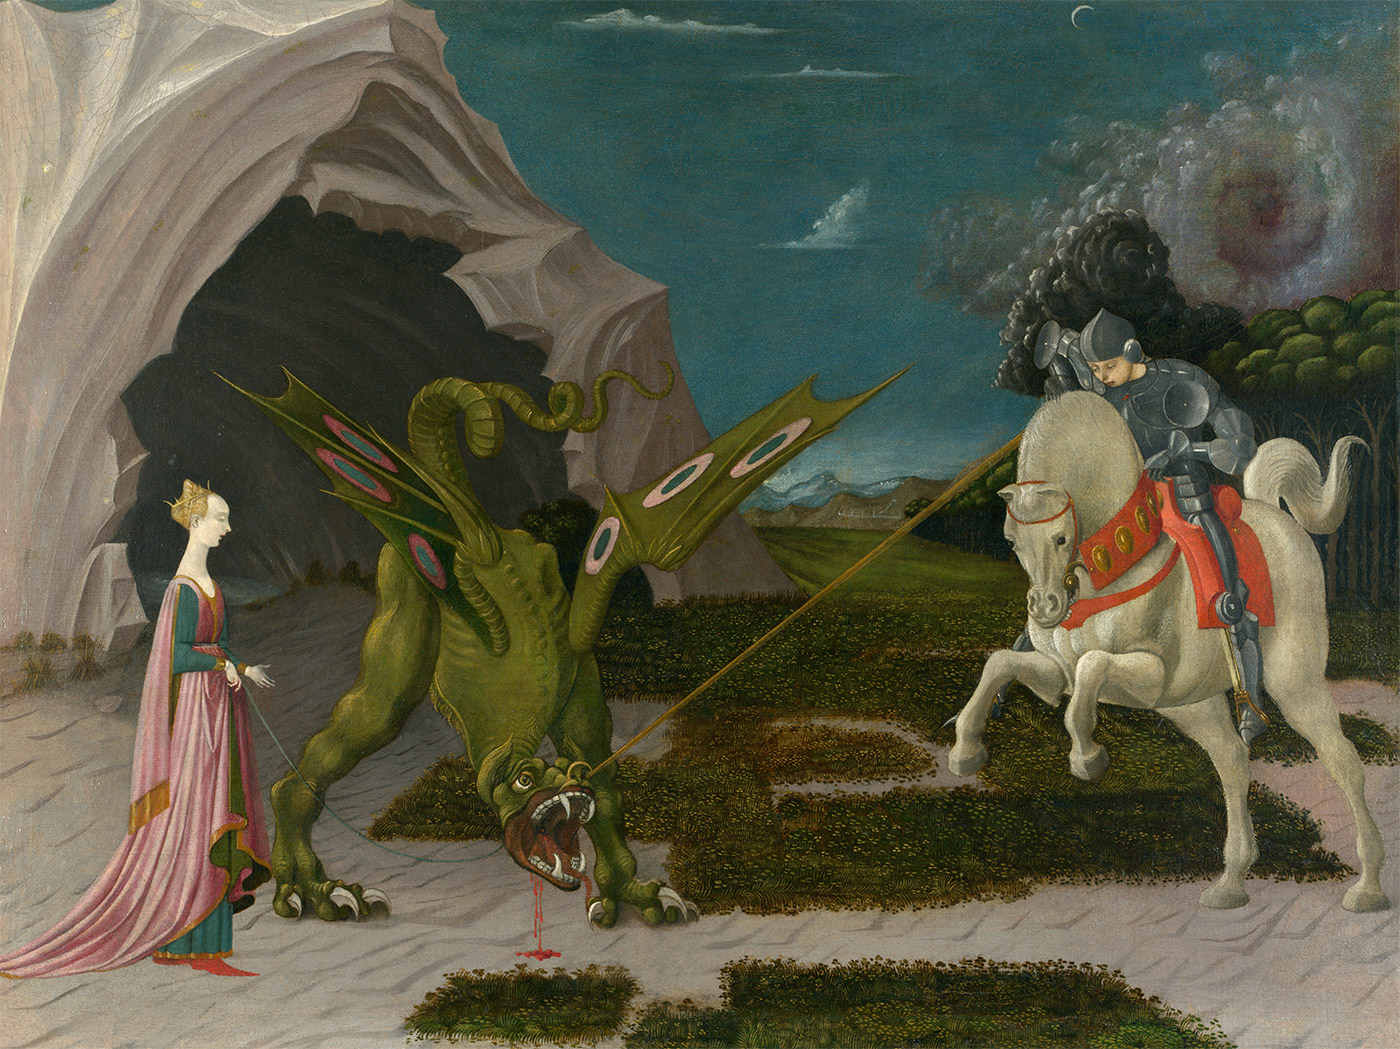 Saint George and the Dragon, by Paolo Uccello, c.1470. (akg-images/National Gallery, London)